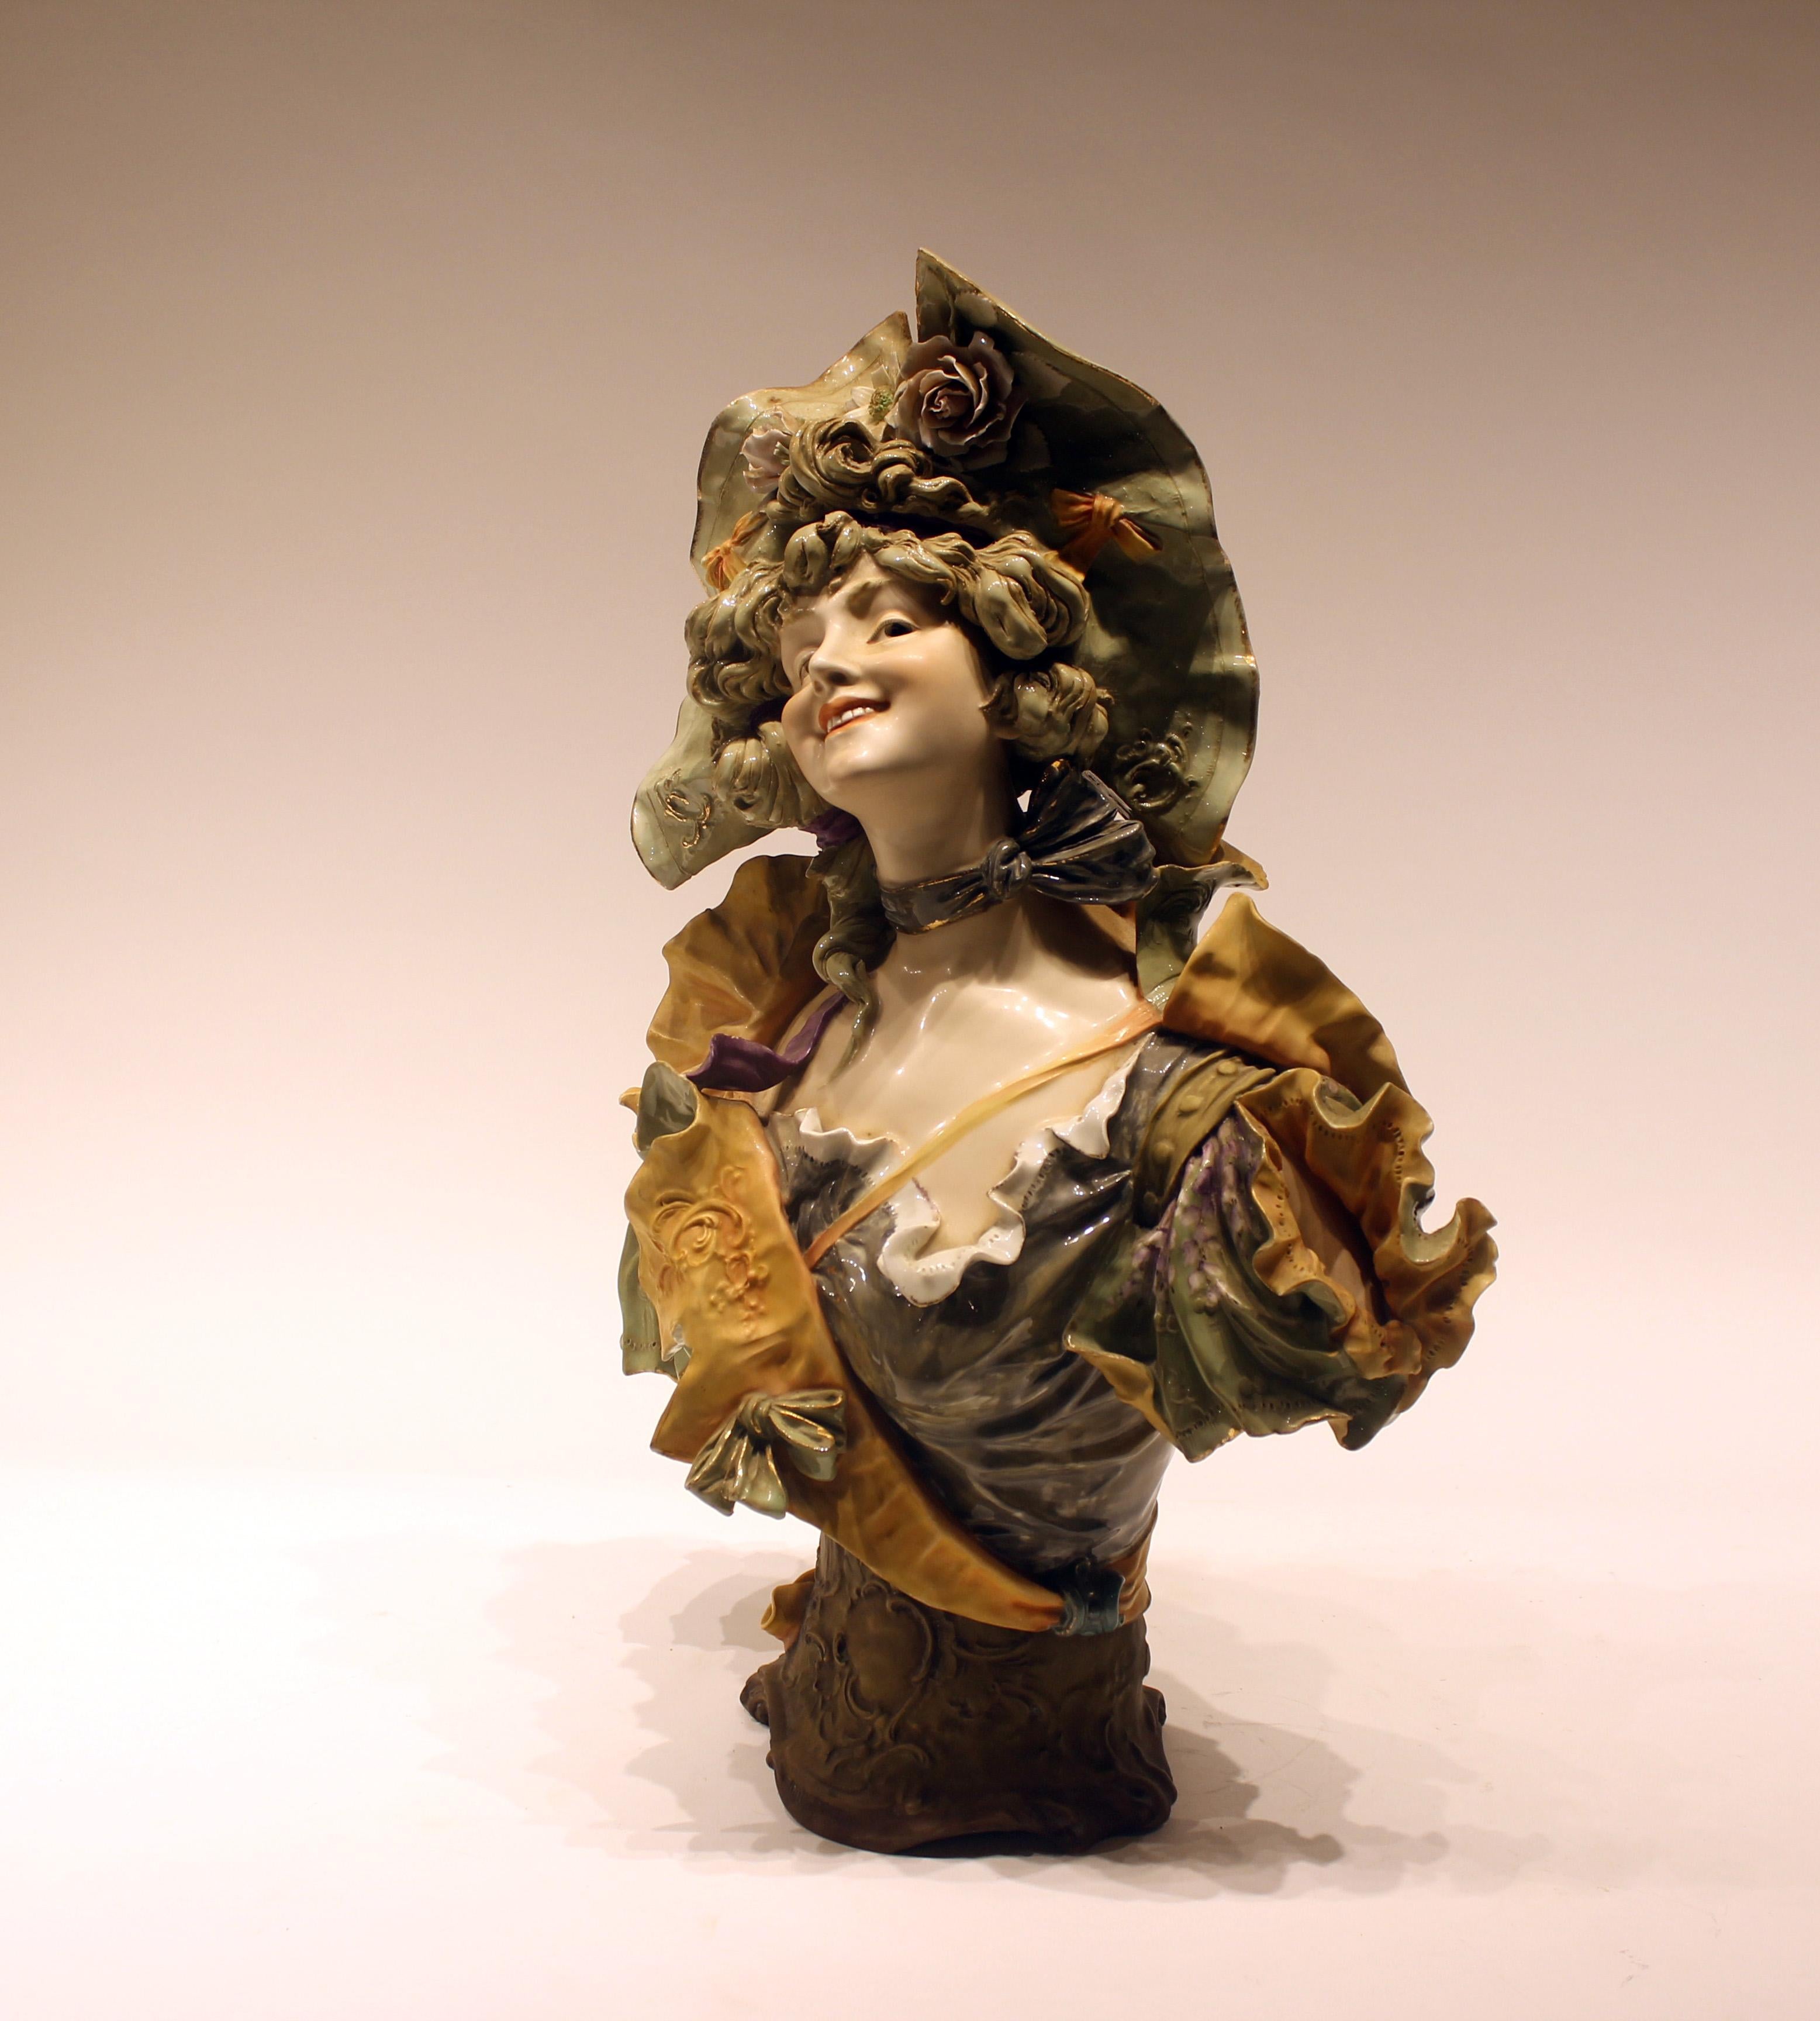 Late 19th century porcelain bust of woman with hat and floral accents most likely Teplitz.